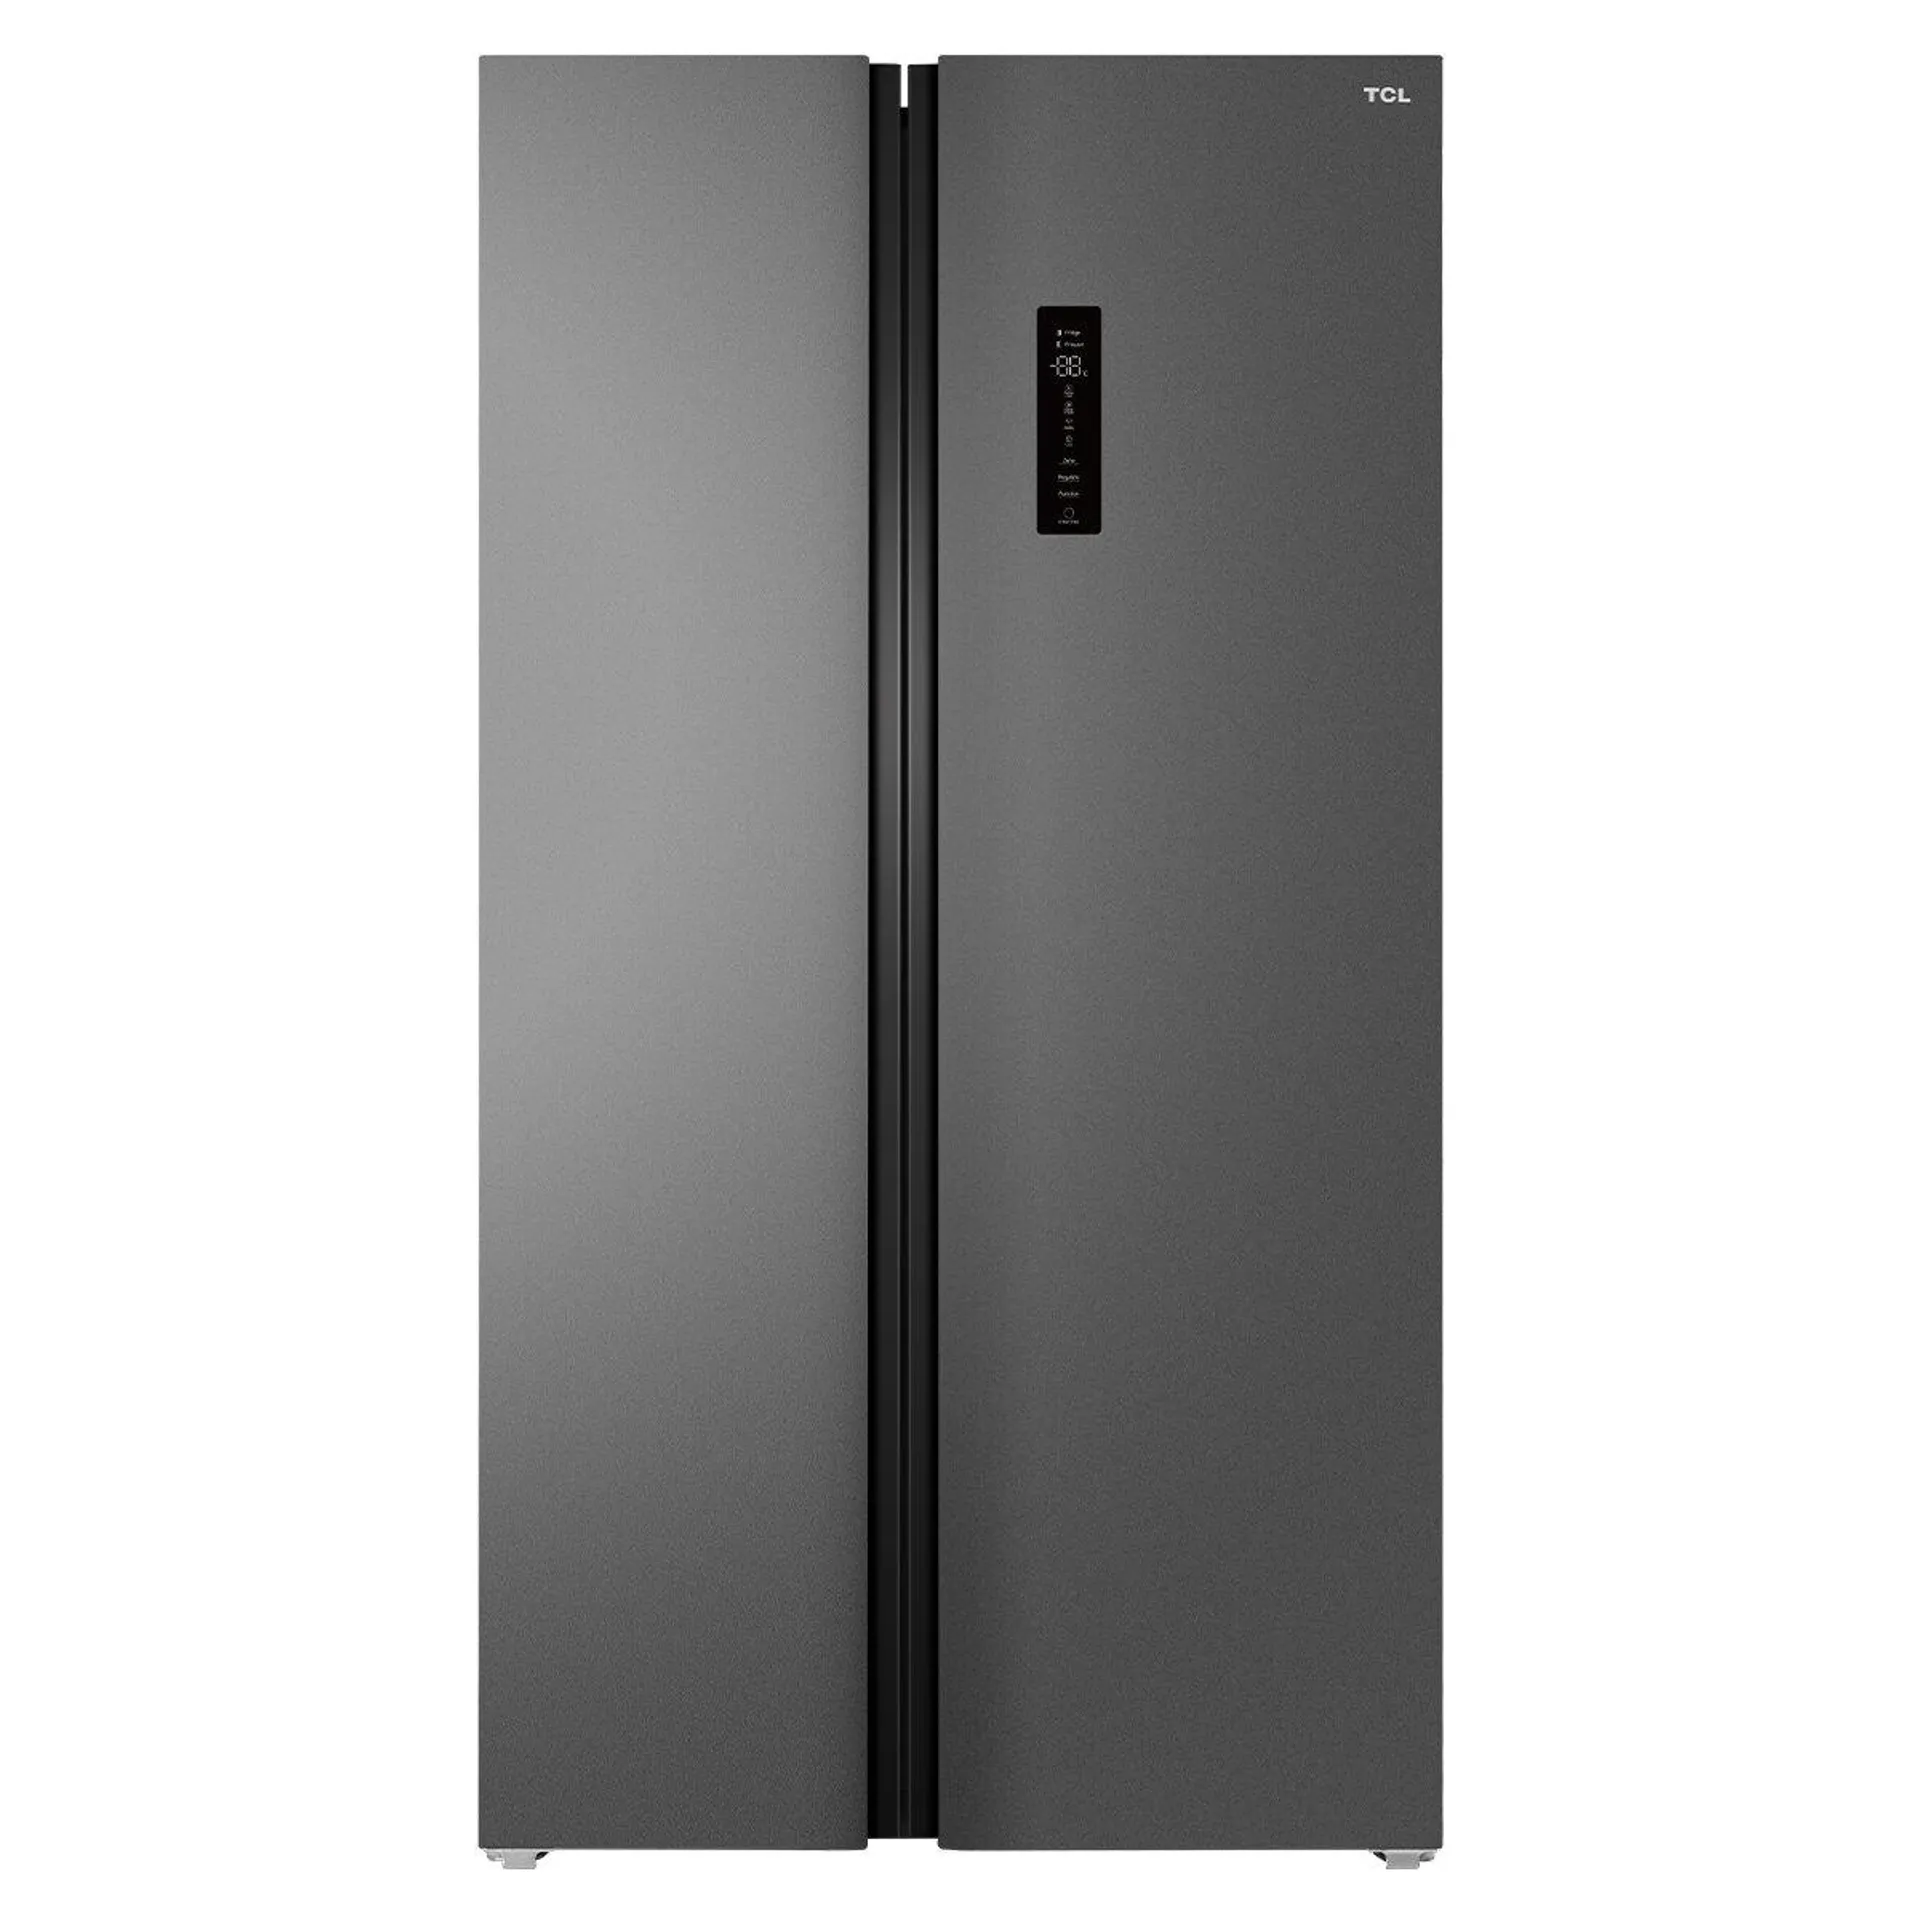 TCL 505L Side by Side Refrigerator Grey P525SBC